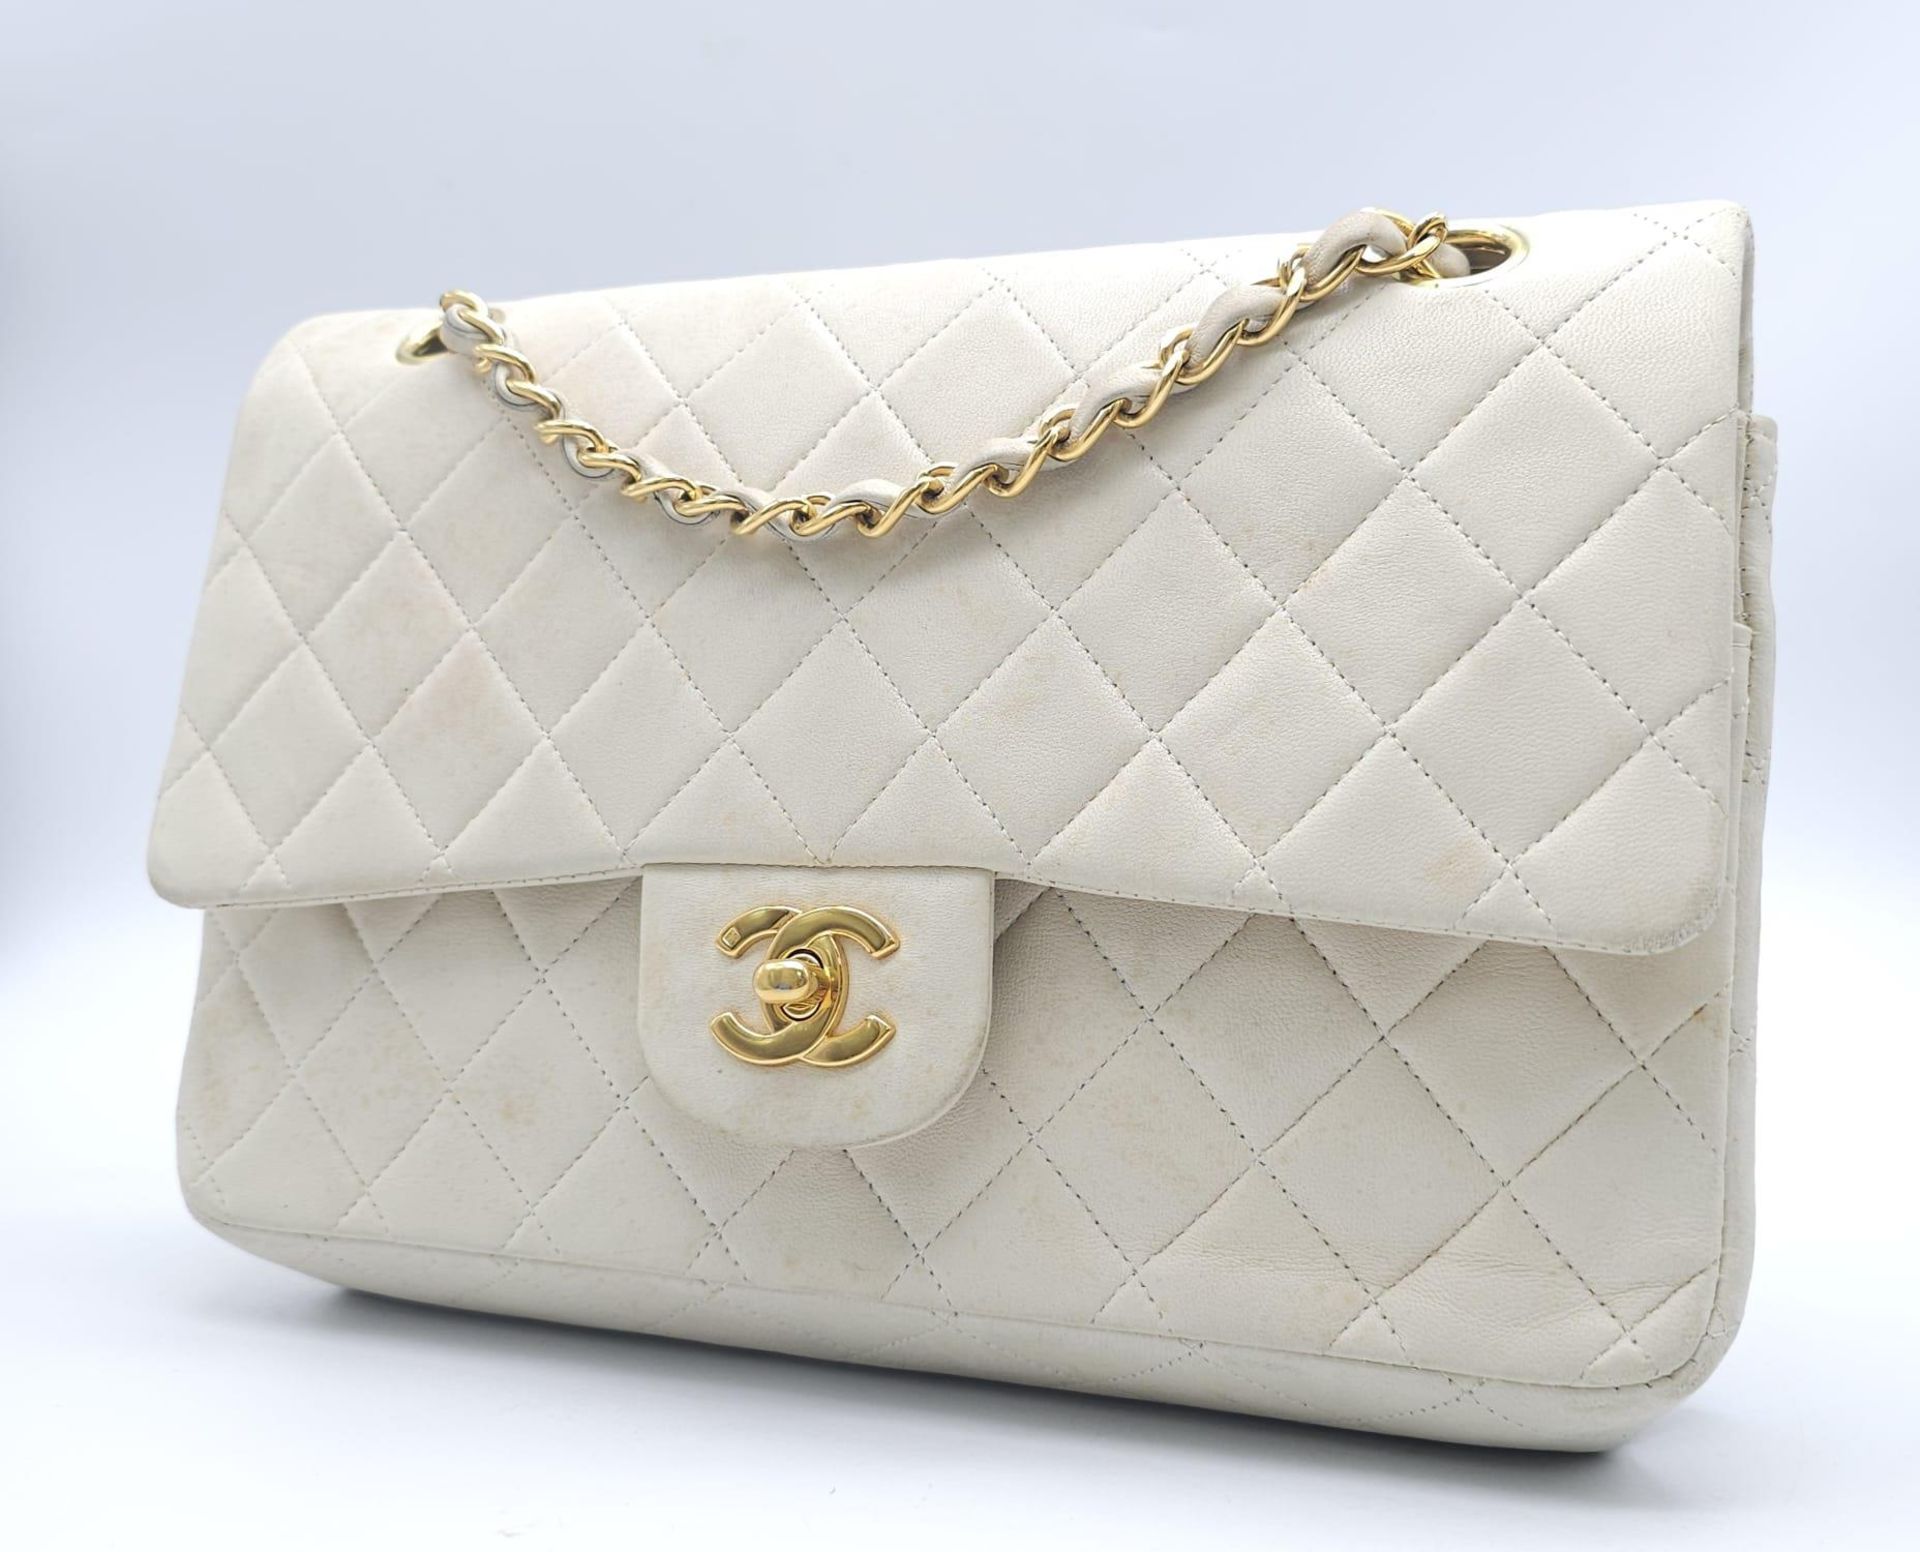 Chanel Cream Maxi. Double handled, quilted in diamond stitching and quality leather throughout. Gold